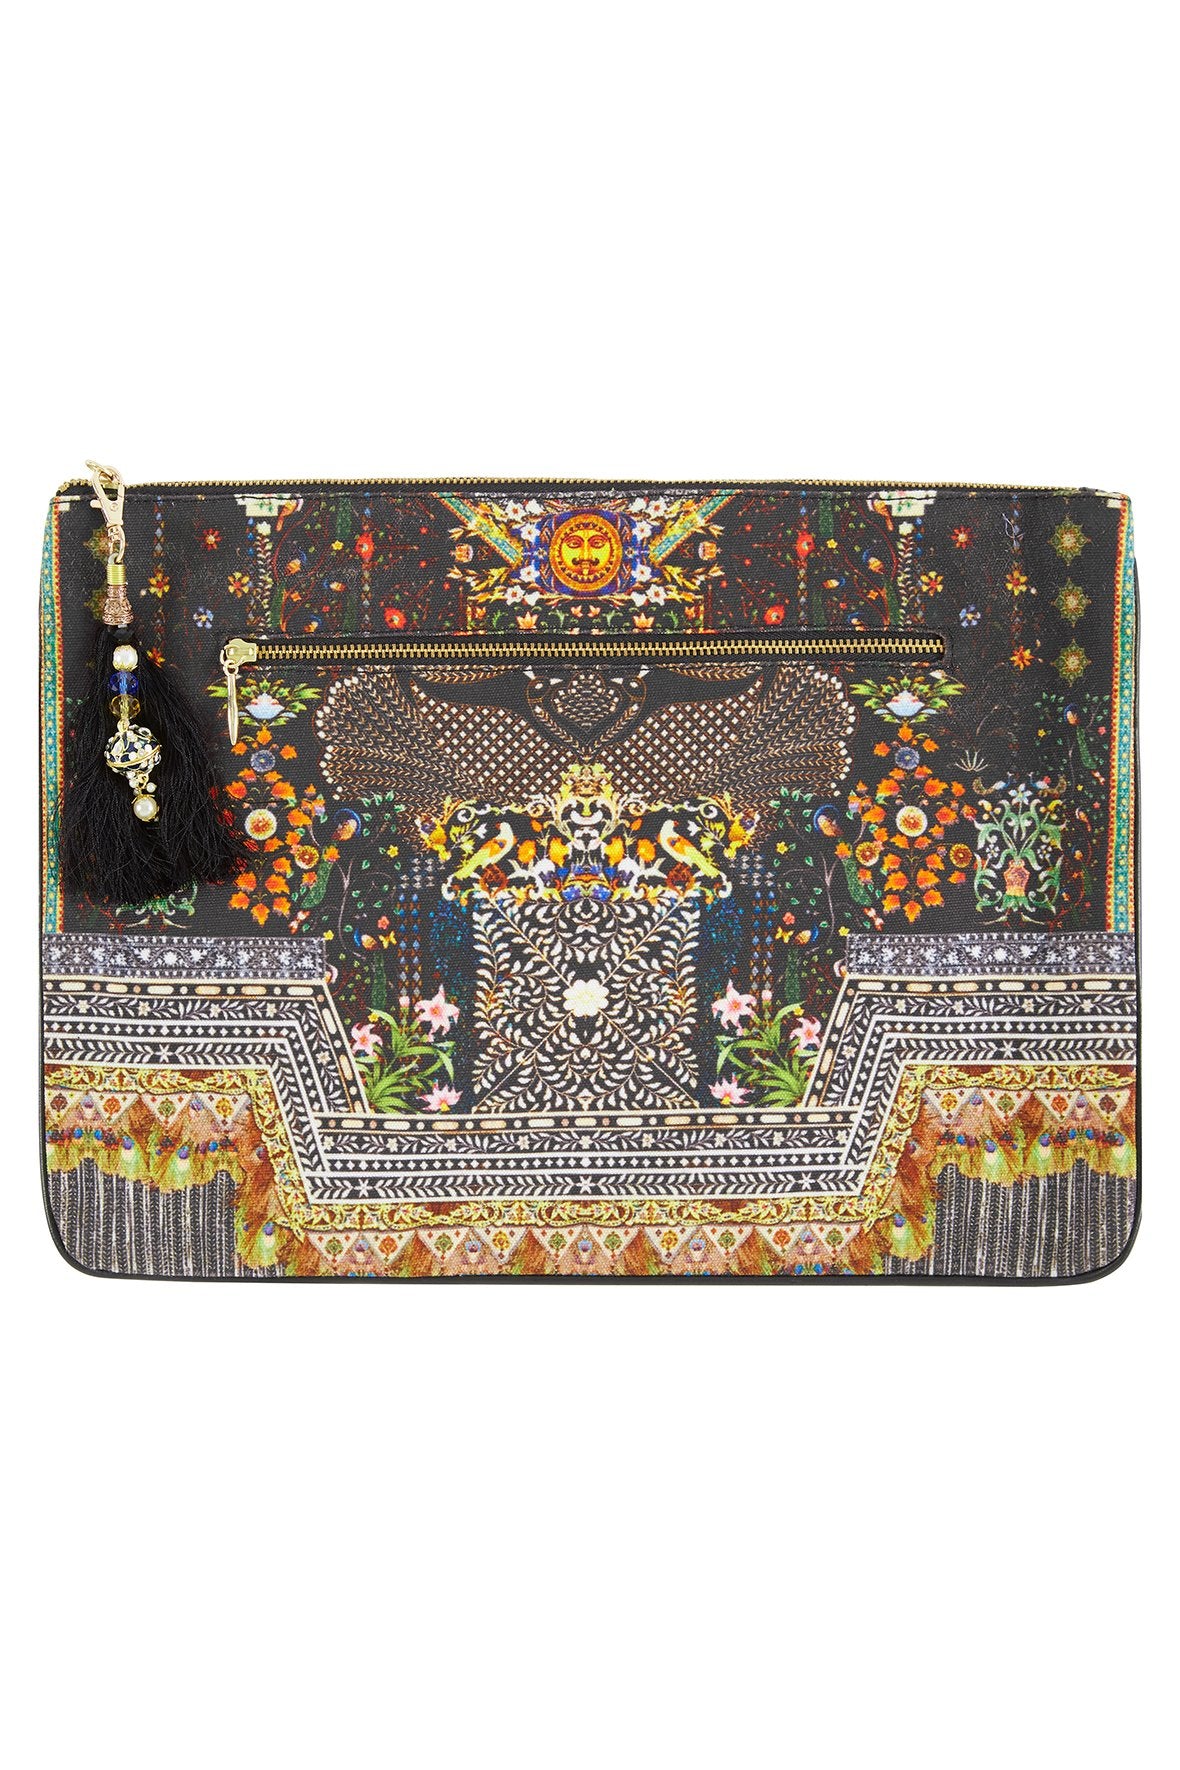 BEHIND CLOSED DOORS LARGE CANVAS CLUTCH